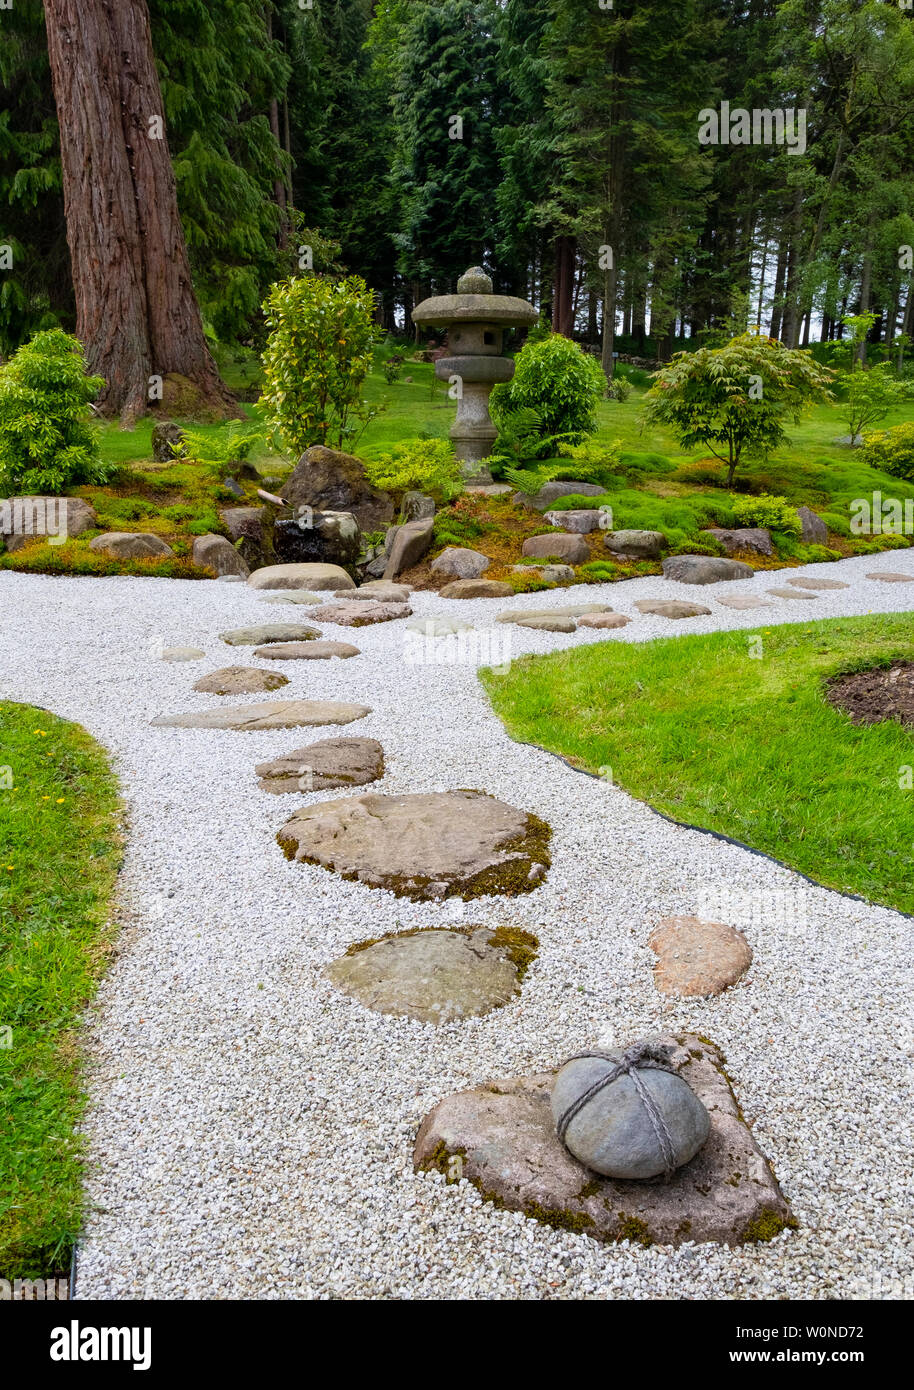 View Of The New Japanese Garden At Cowden In Dollar Clackmannanshire Scotland Uk Stock Photo Alamy